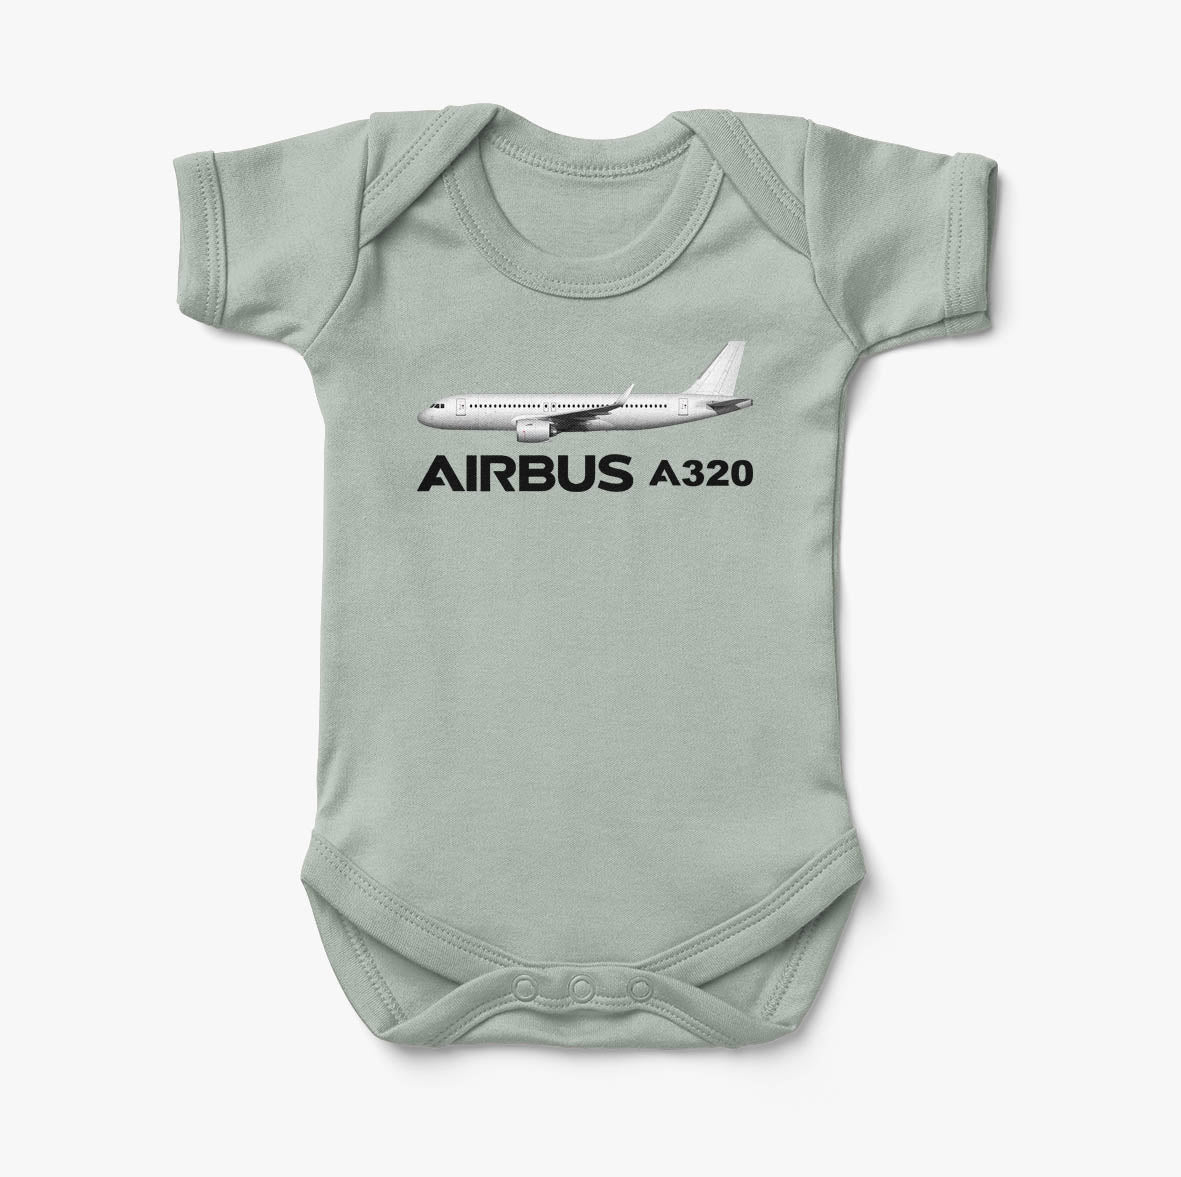 The Airbus A320 Designed Baby Bodysuits